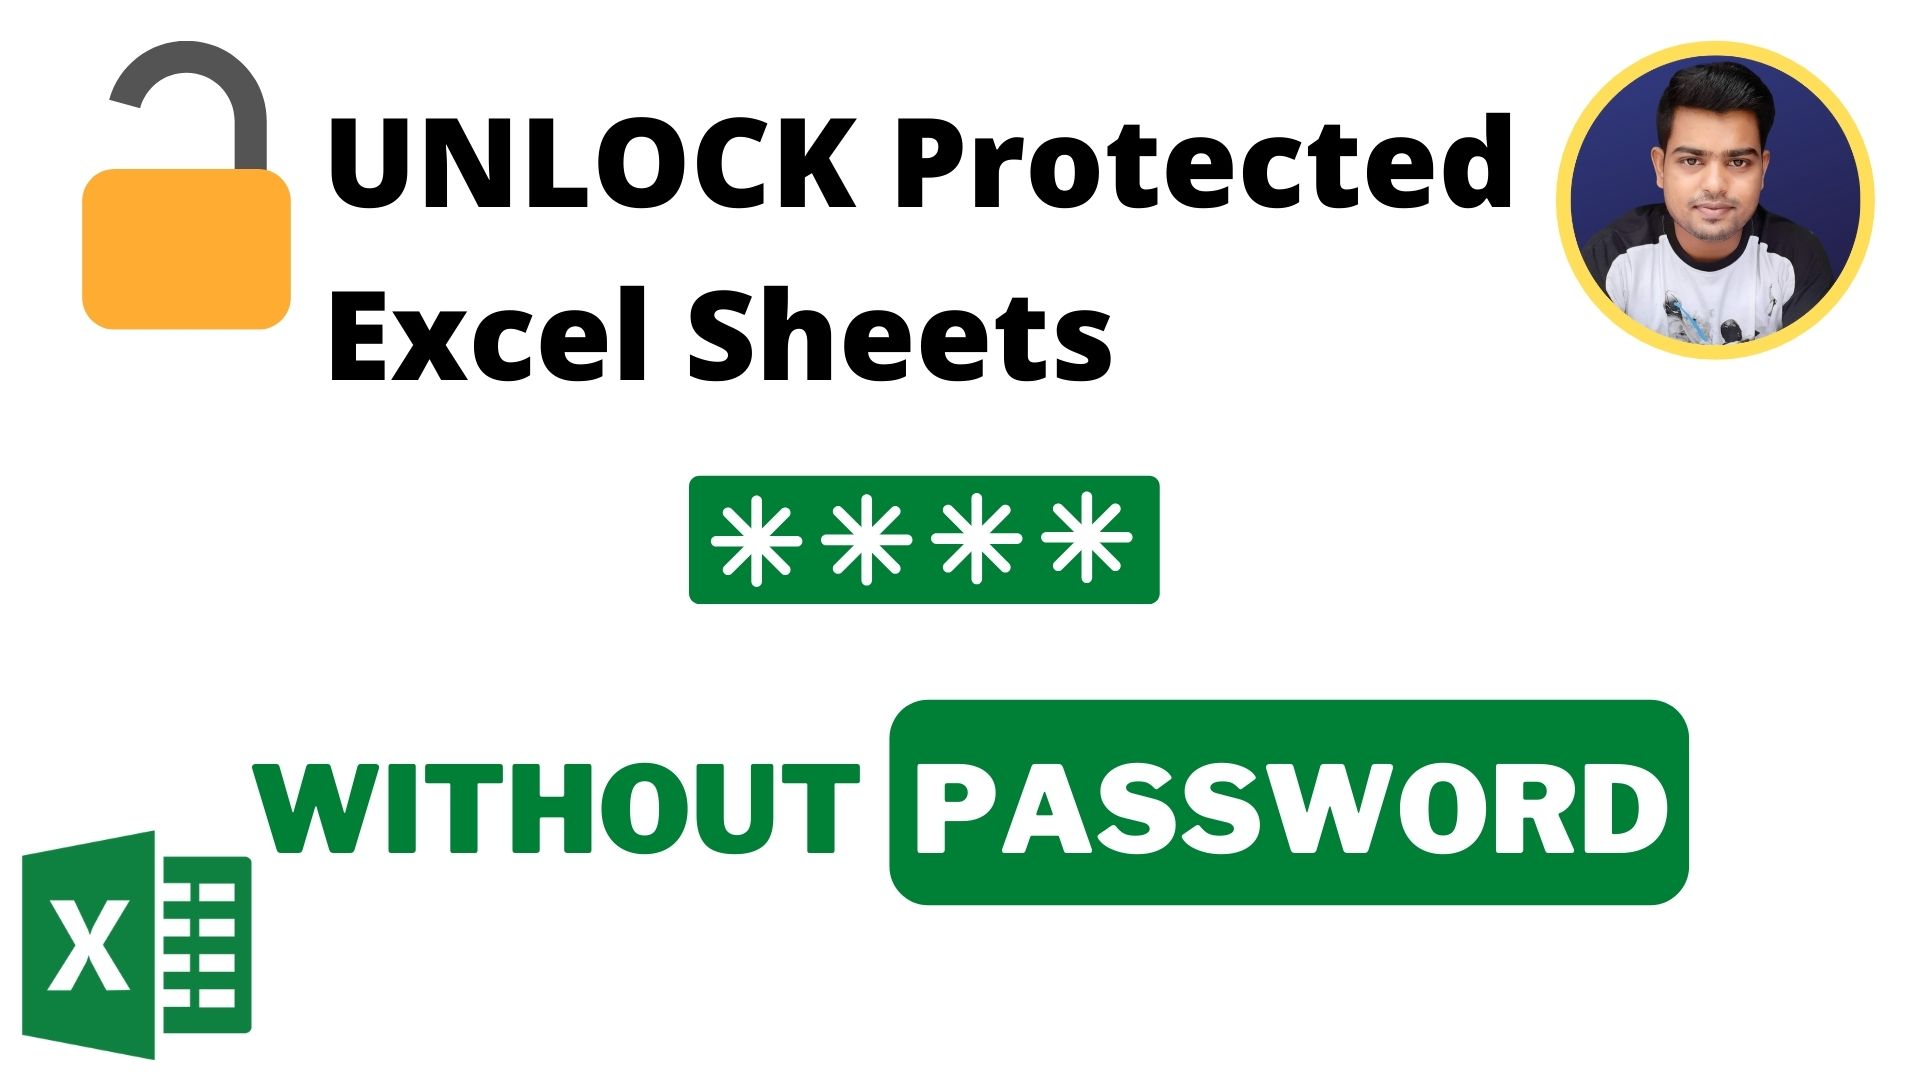 Unlock Protected Excel Sheets Without Password Techtipsexpress 1366